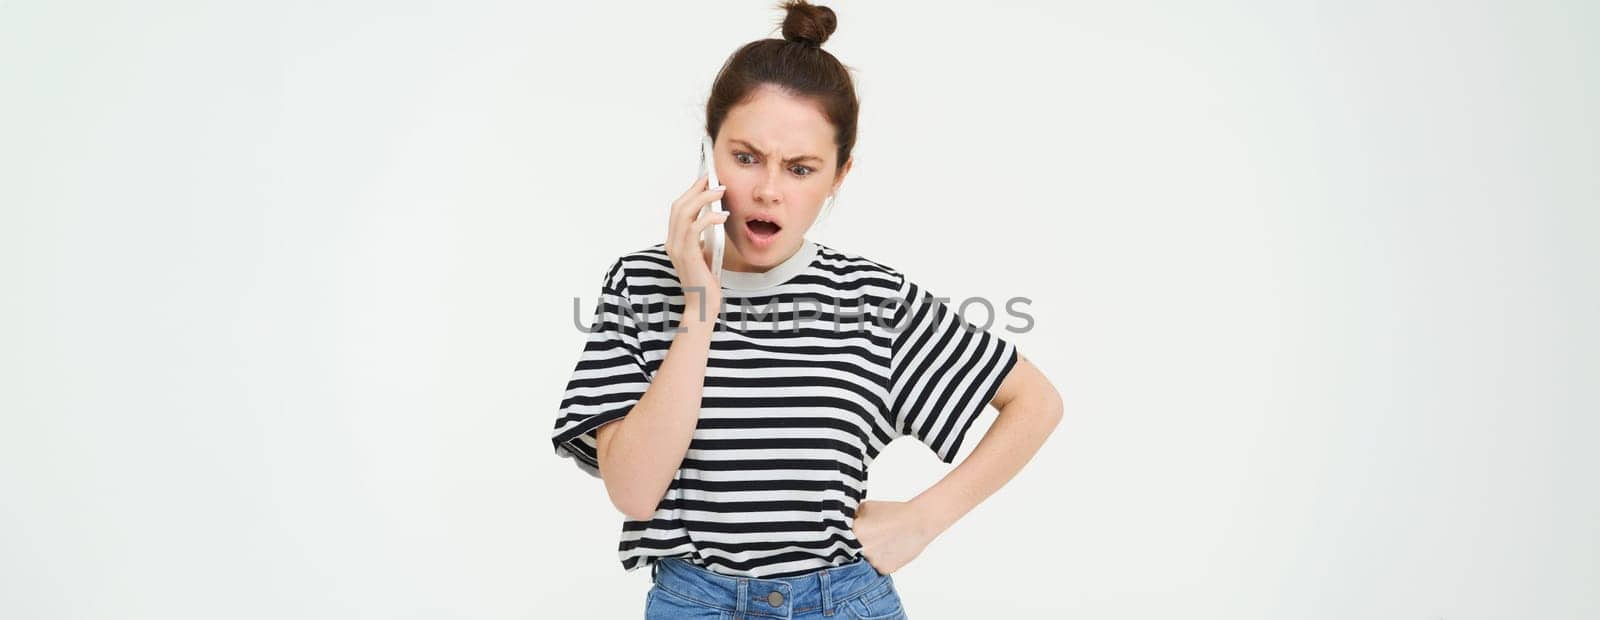 Image of brunette woman arguing, shouting on telephone, having an argument on mobile phone, standing over white background.